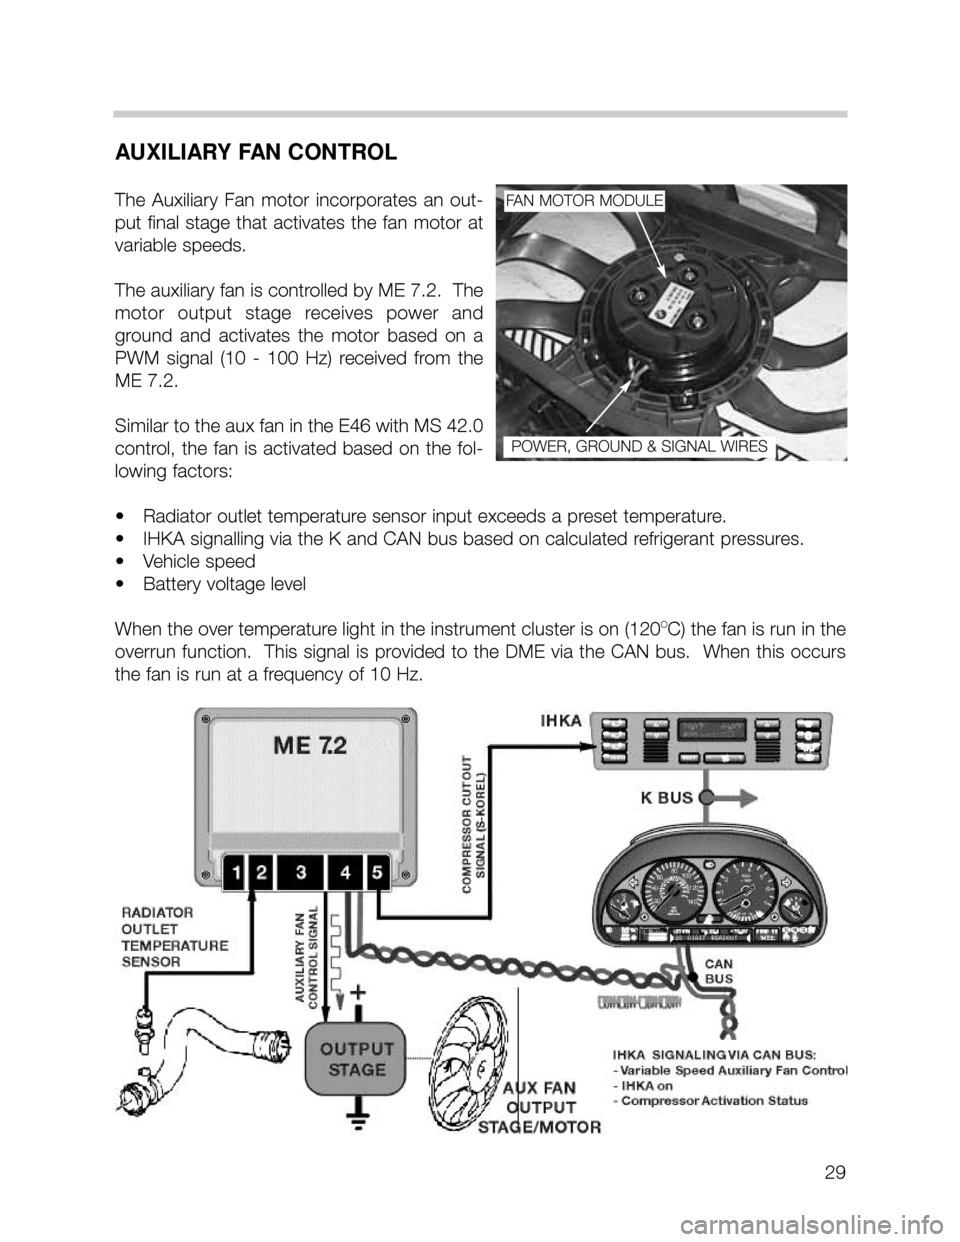 BMW 535i 2001 E39 M62TU Engine Workshop Manual 29
AUXILIARY FAN CONTROL
The  Auxiliary  Fan  motor  incorporates  an  out-
put  final  stage  that  activates  the  fan  motor  at
variable speeds.  
The auxiliary fan is controlled by ME 7.2.  The
m